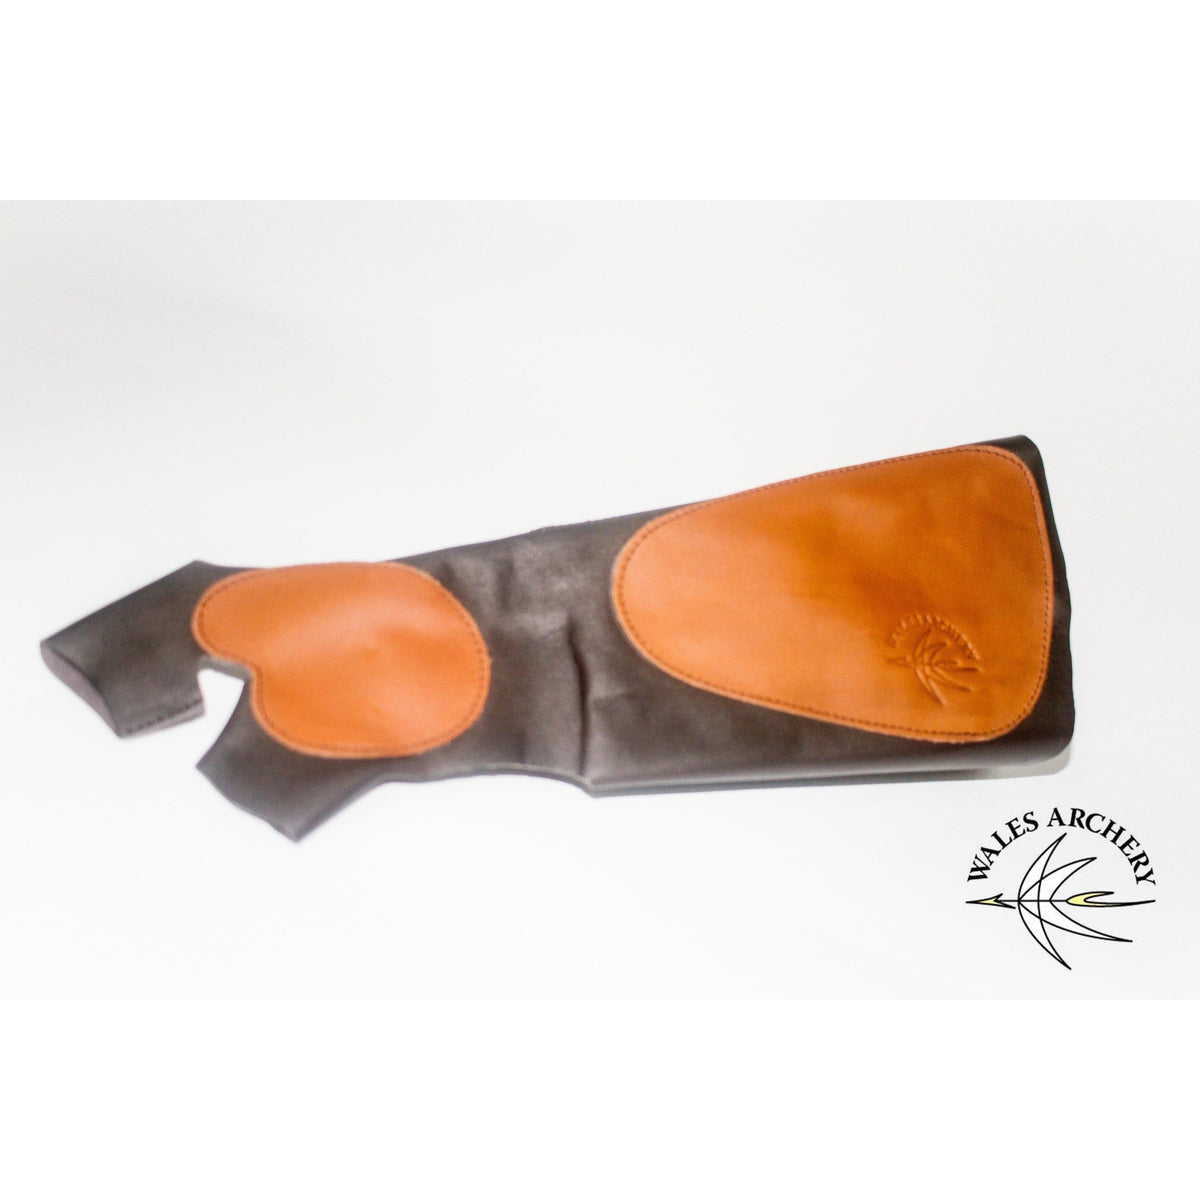 WAS Traditional Leather Armguard combined with Hand Glove